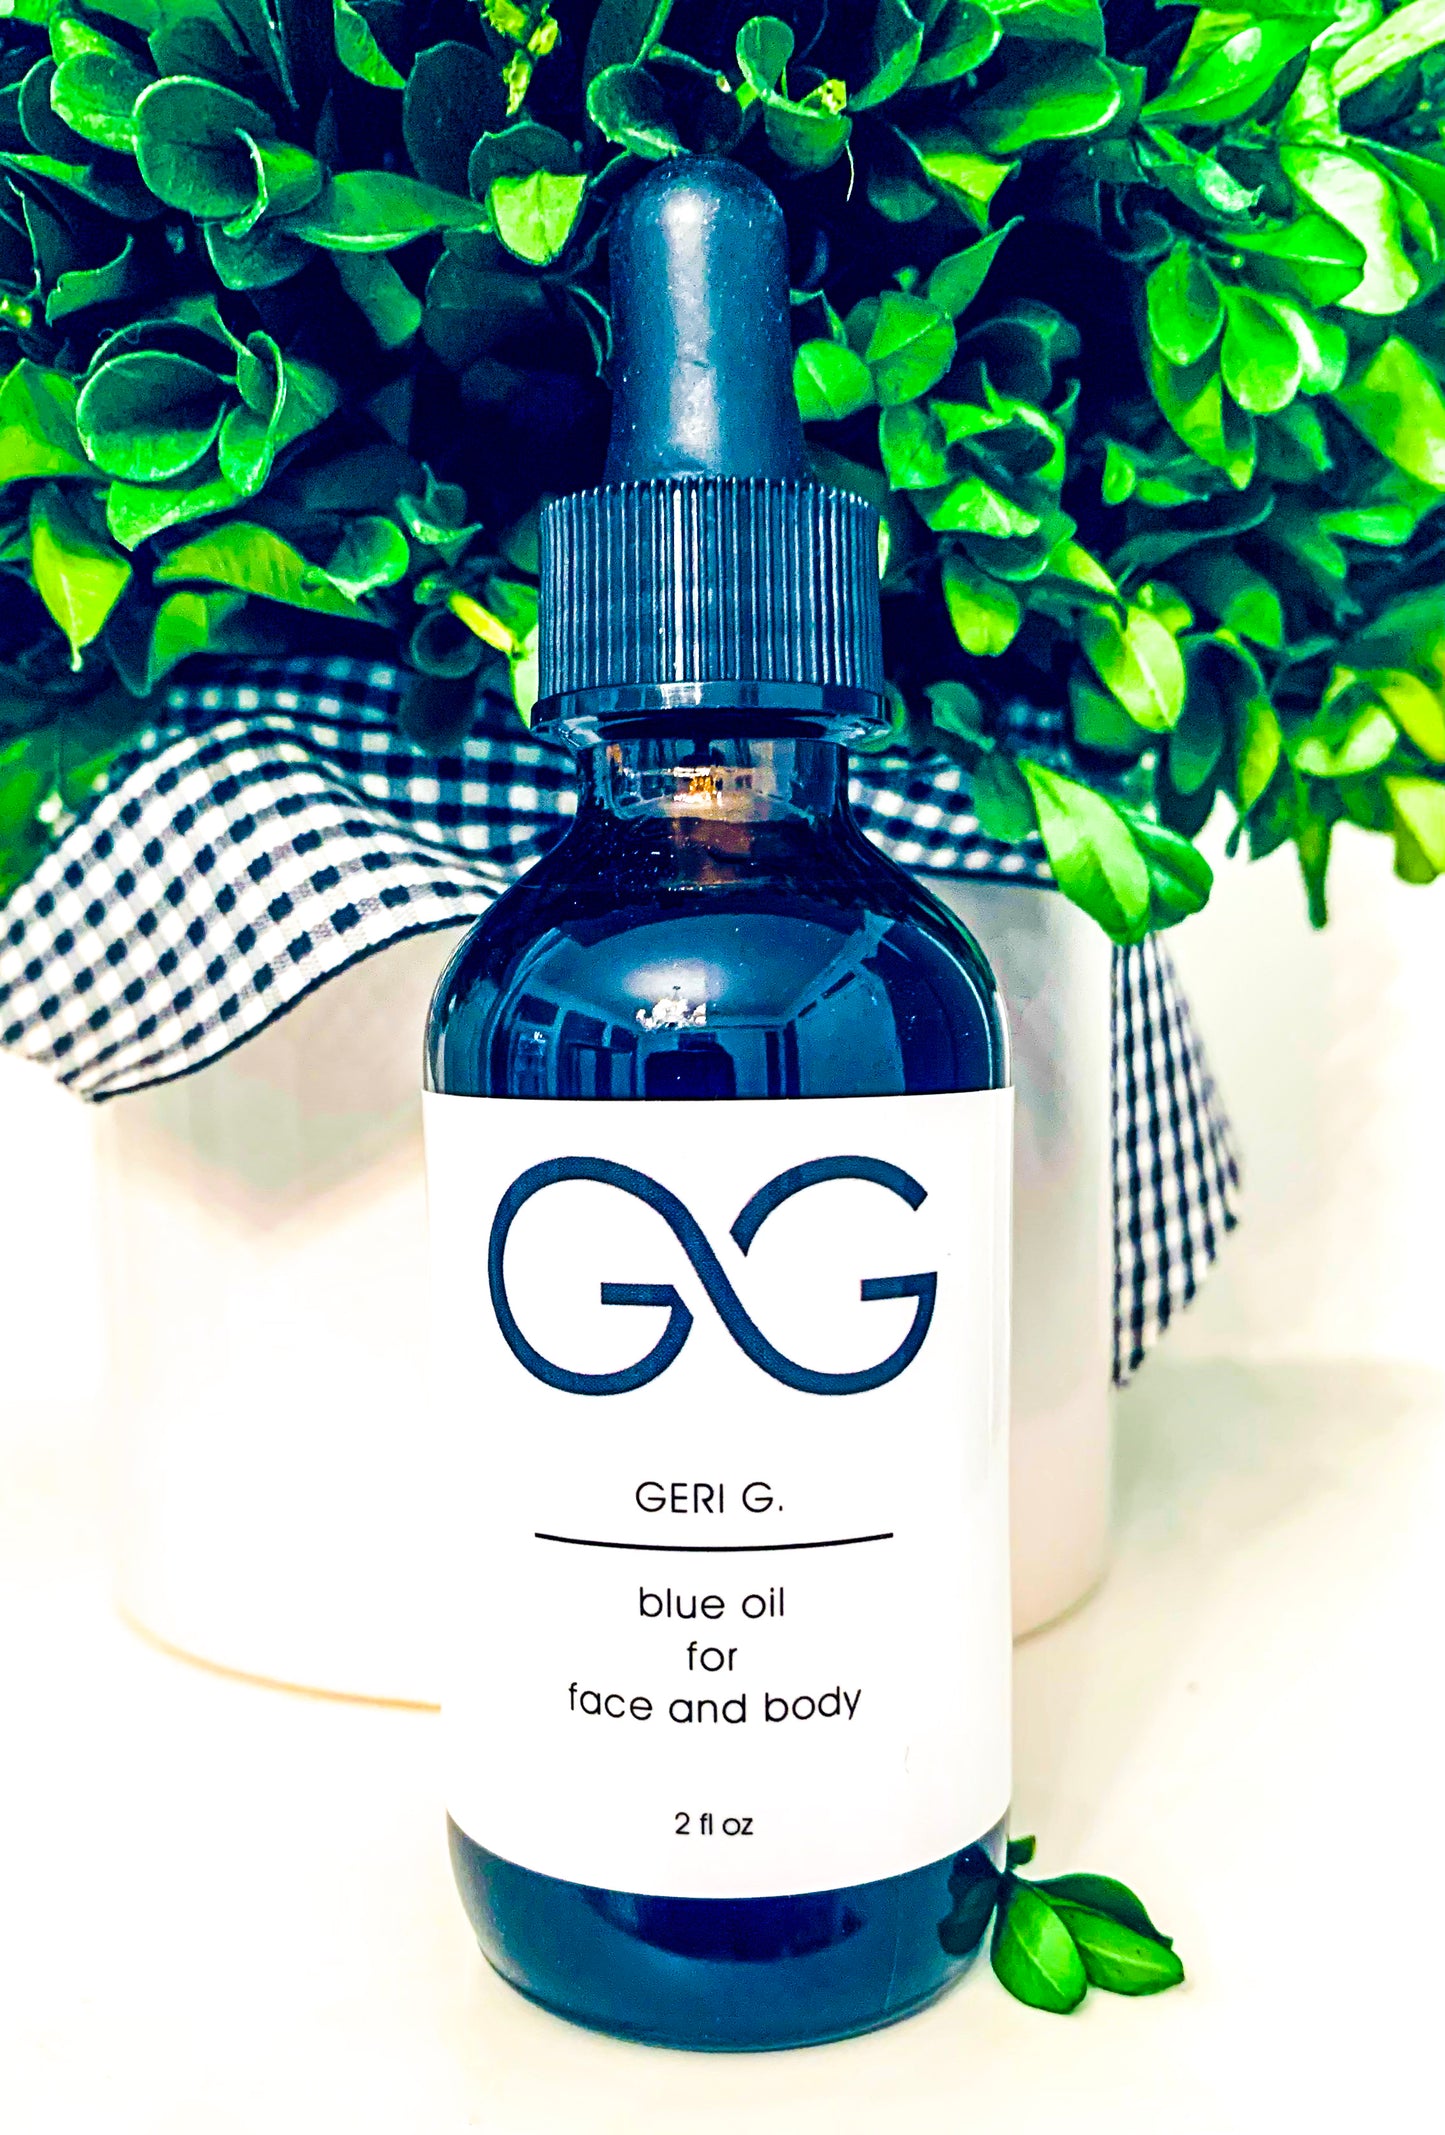 Geri G. Beauty blue oil head to toe soothes and hydrates all skins